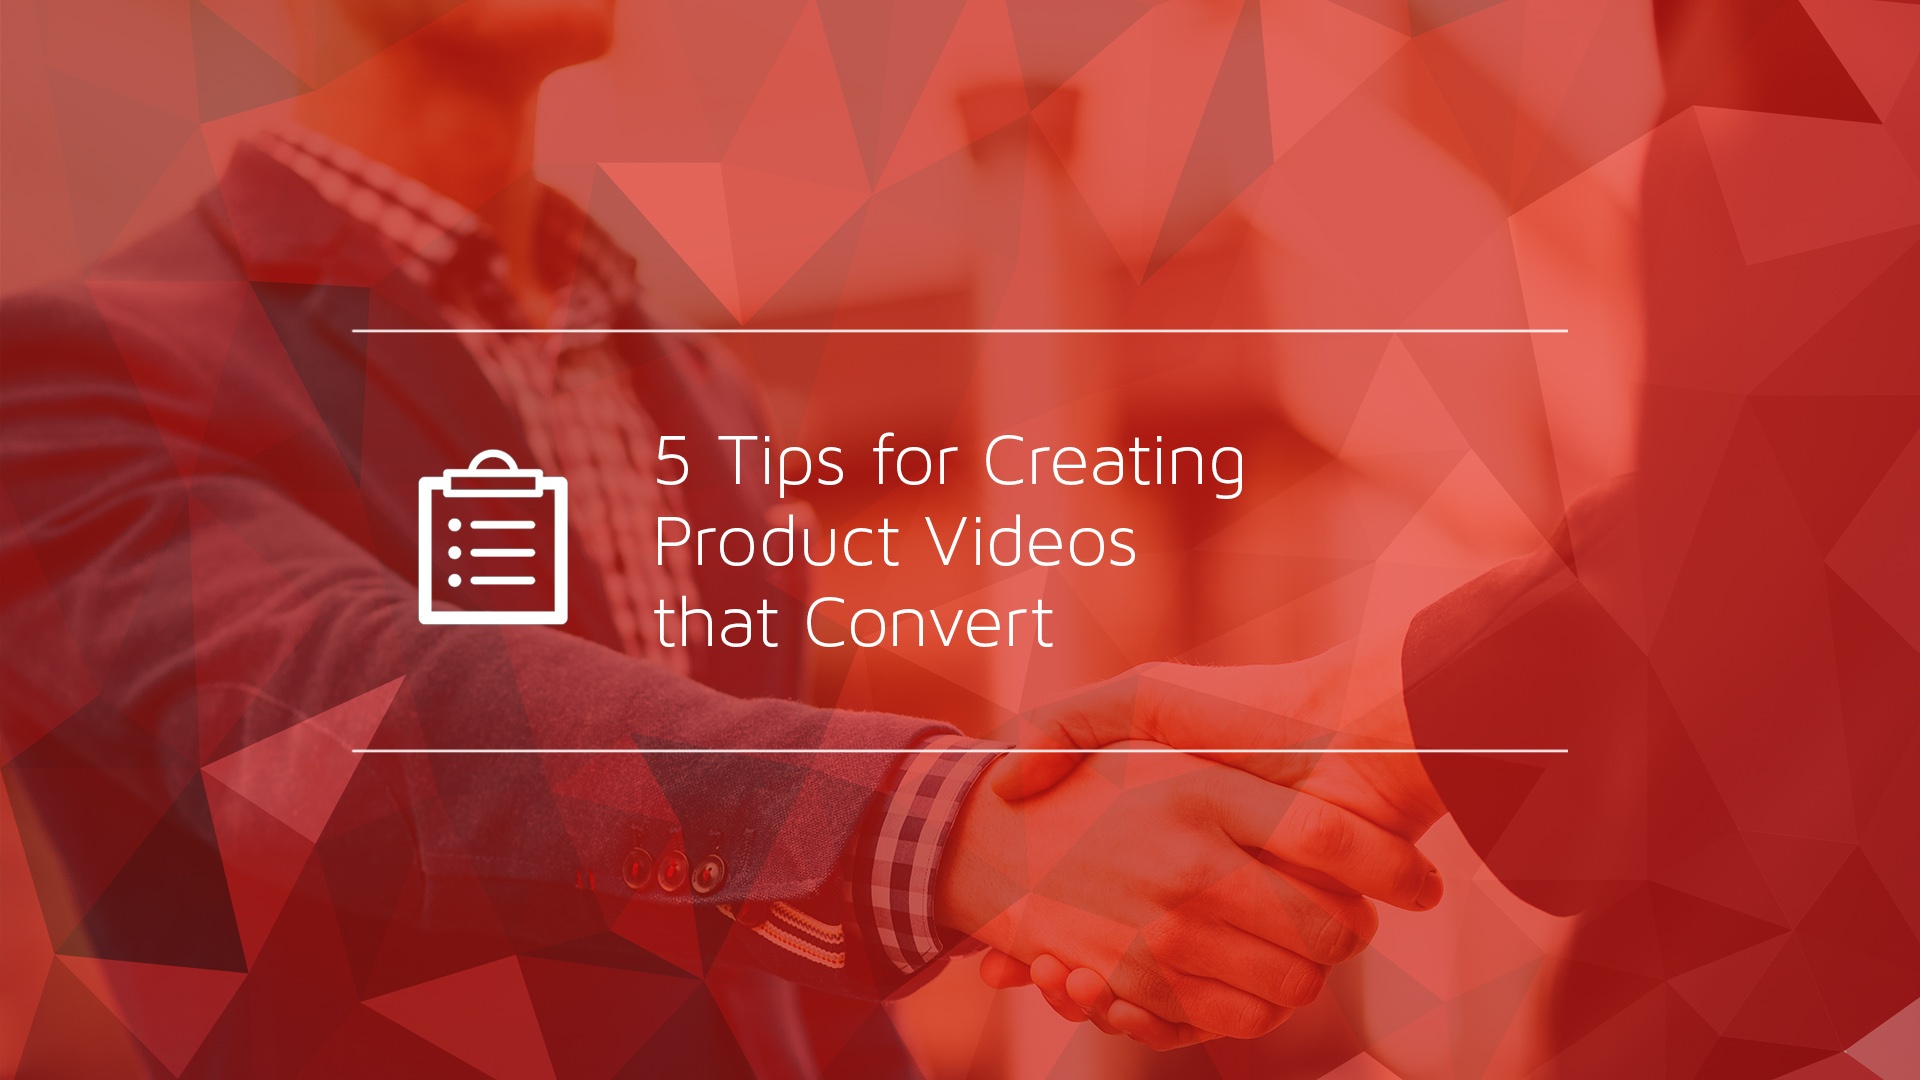 5 Tips for Creating Product Videos that Convert.jpg